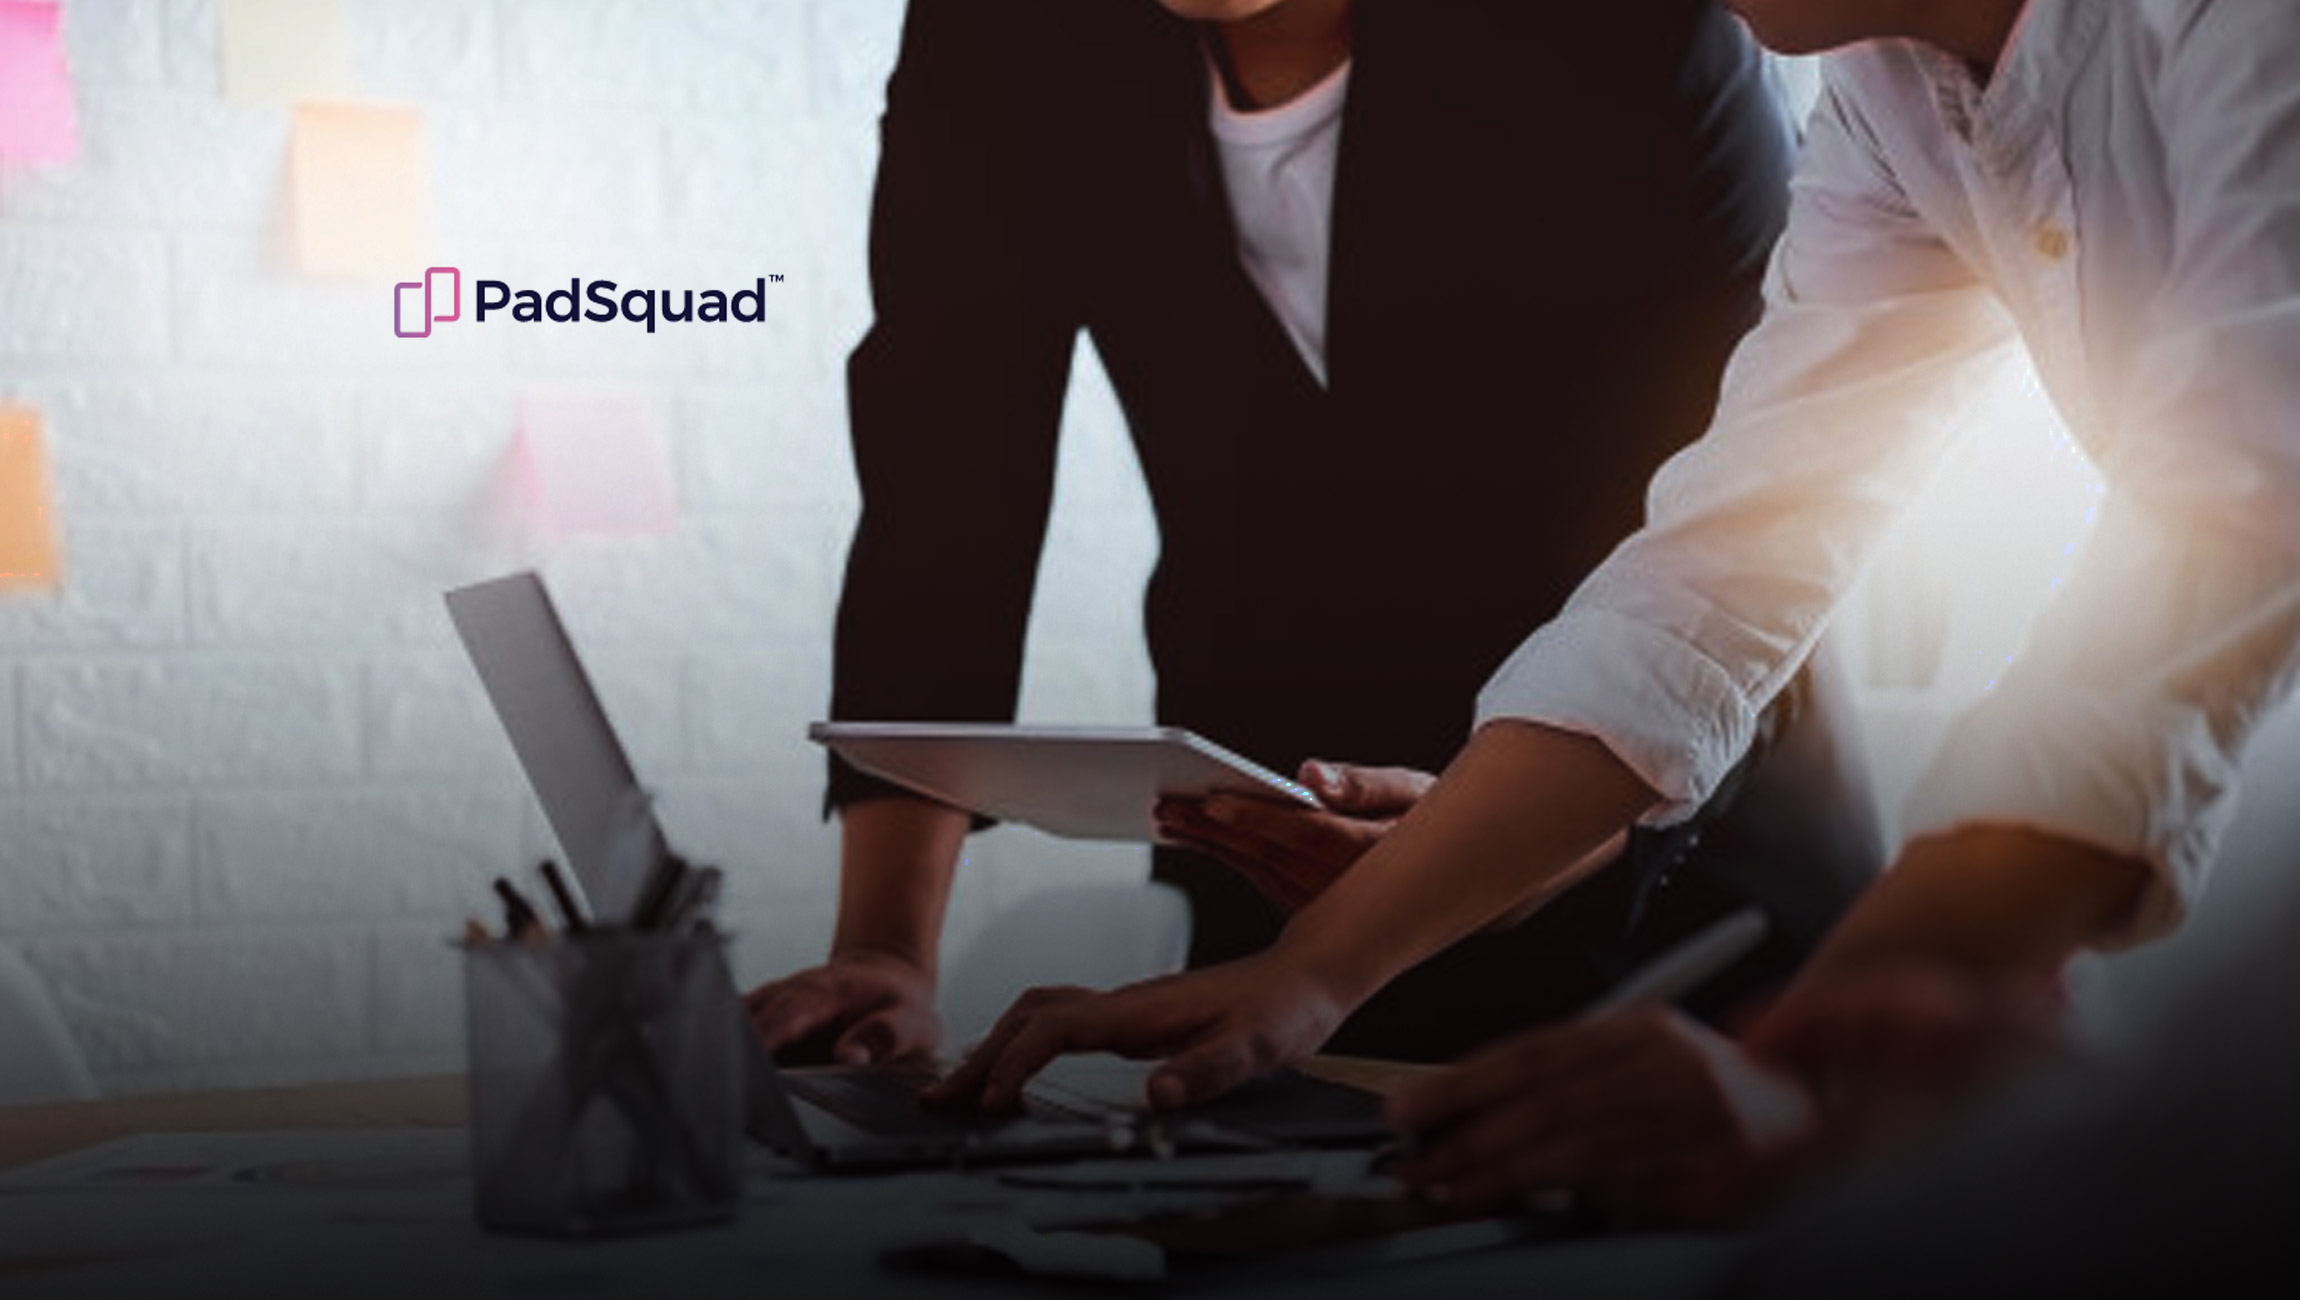 PadSquad Deploys the Iguazio Data Science Platform to Predict Ad Performance in Real-Time